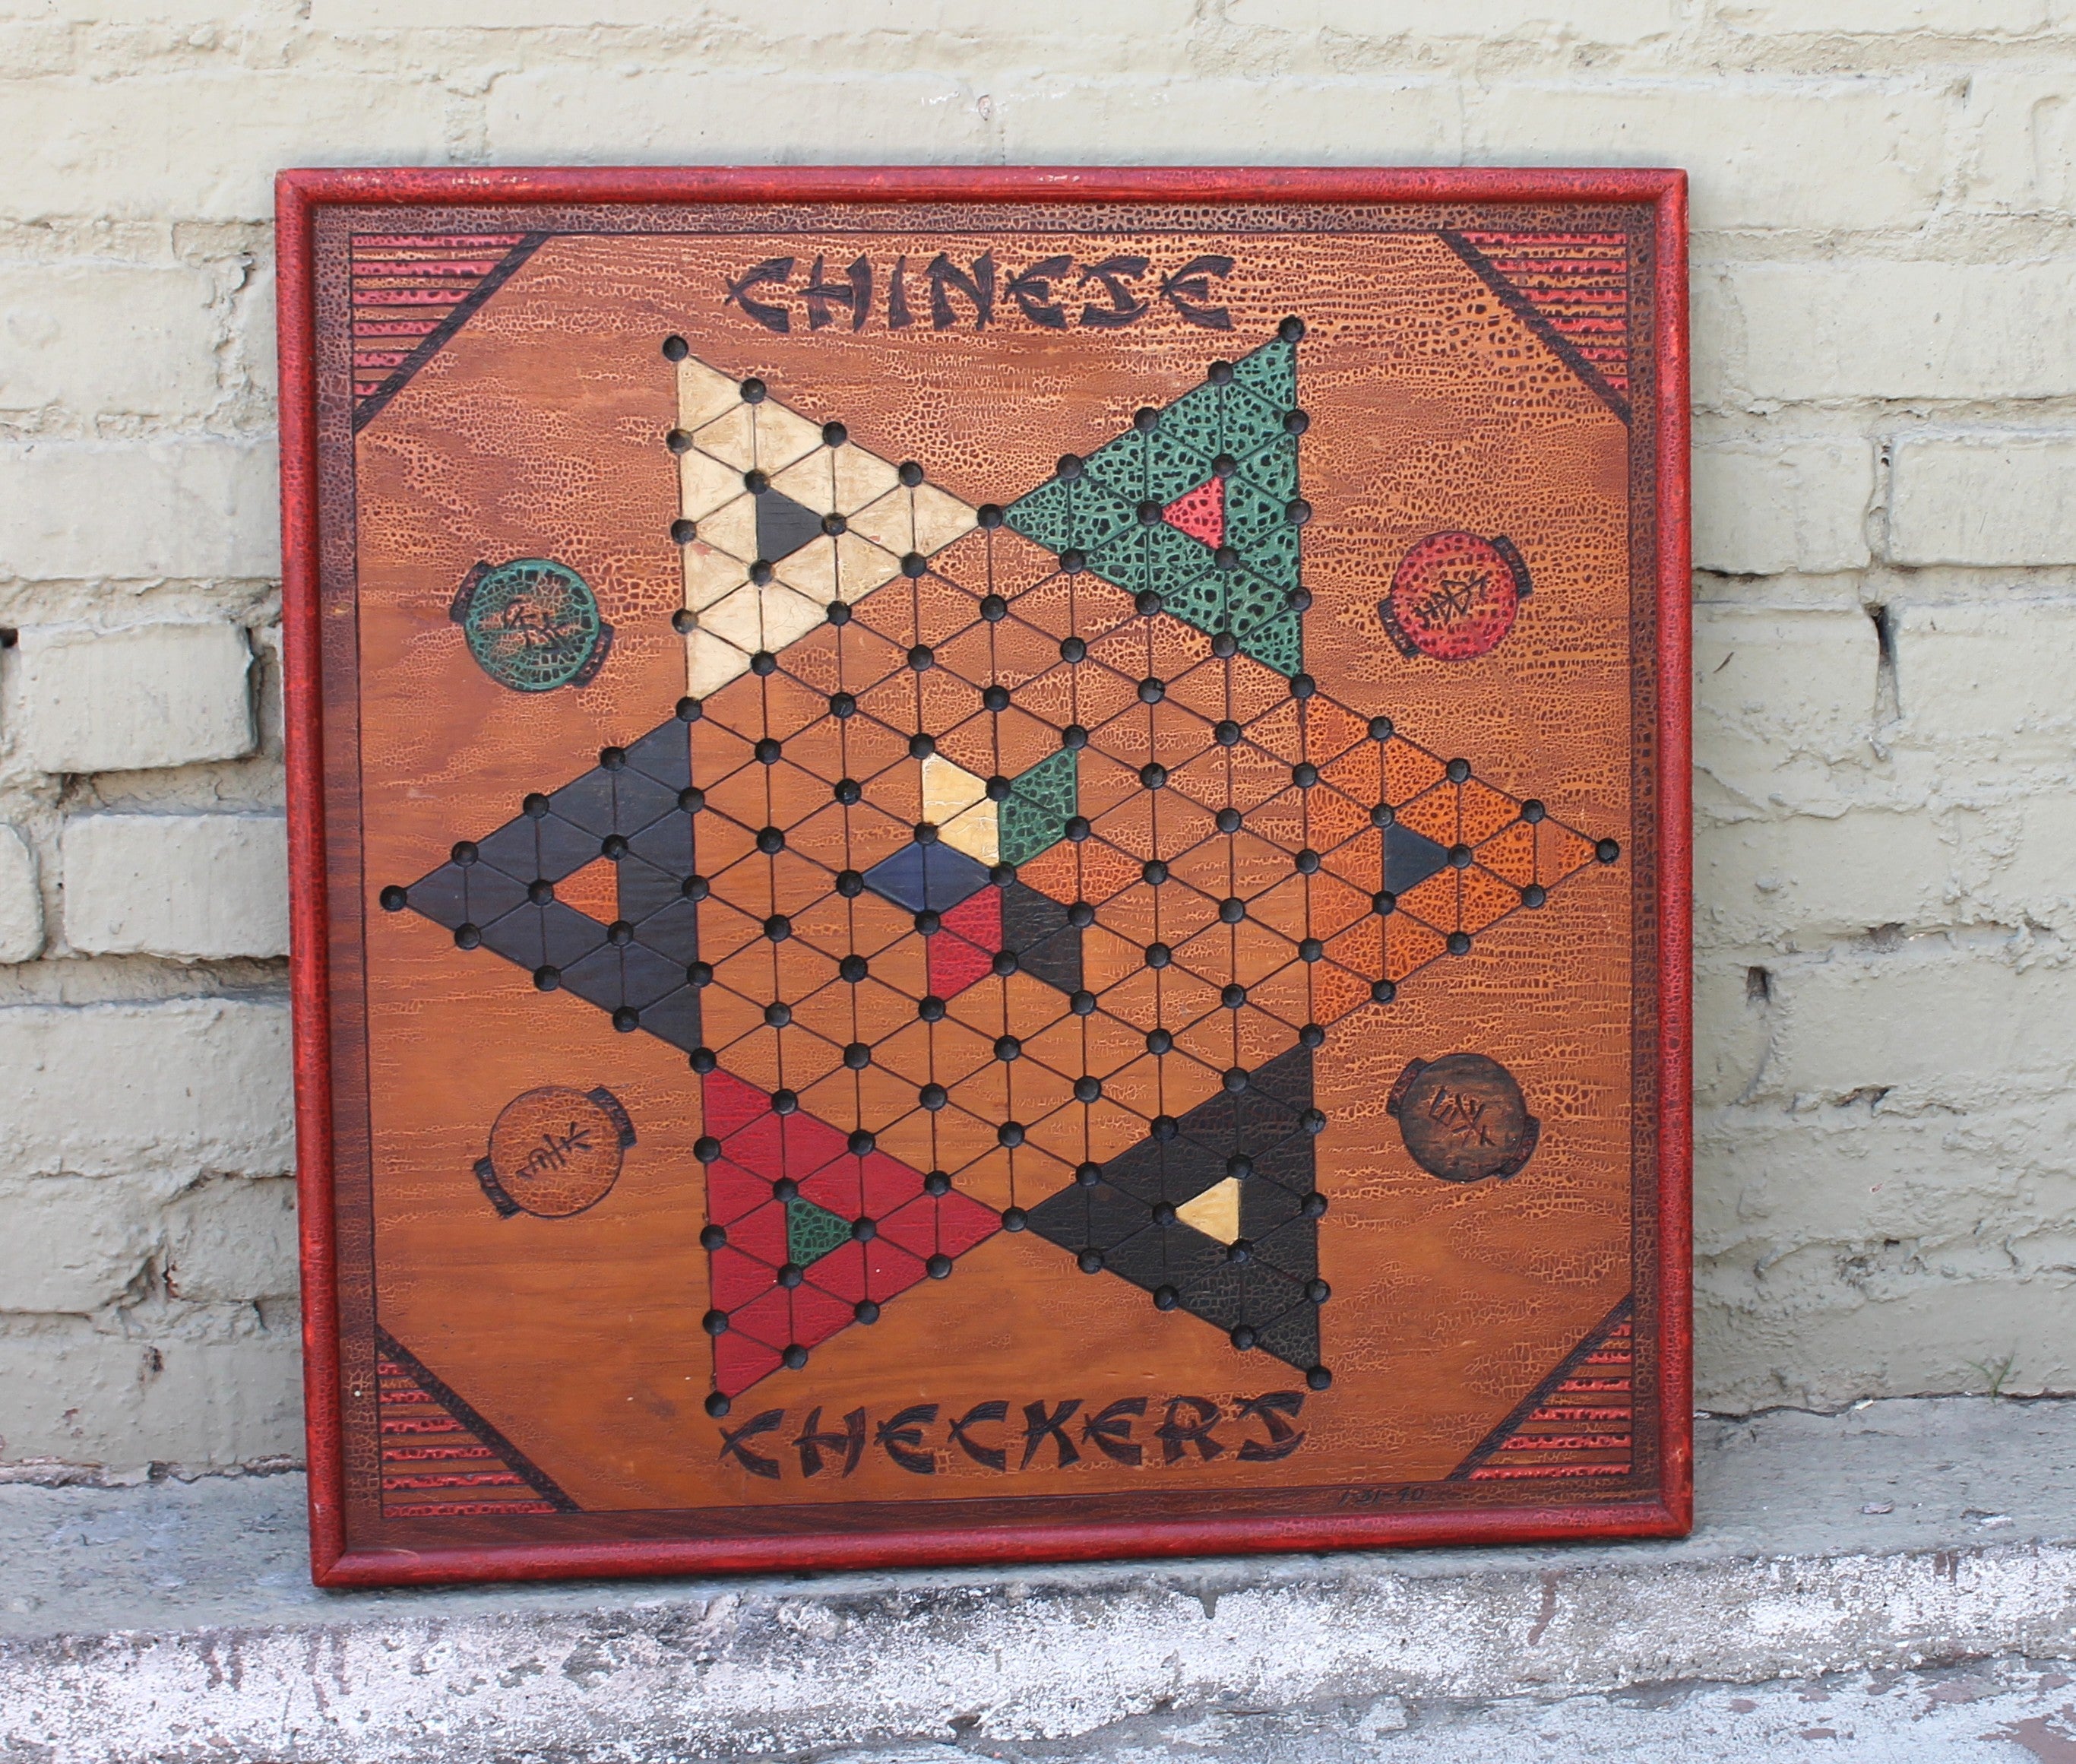 Vintage Oversized Hand Painted Chinese/Traditional Checkers Game Board